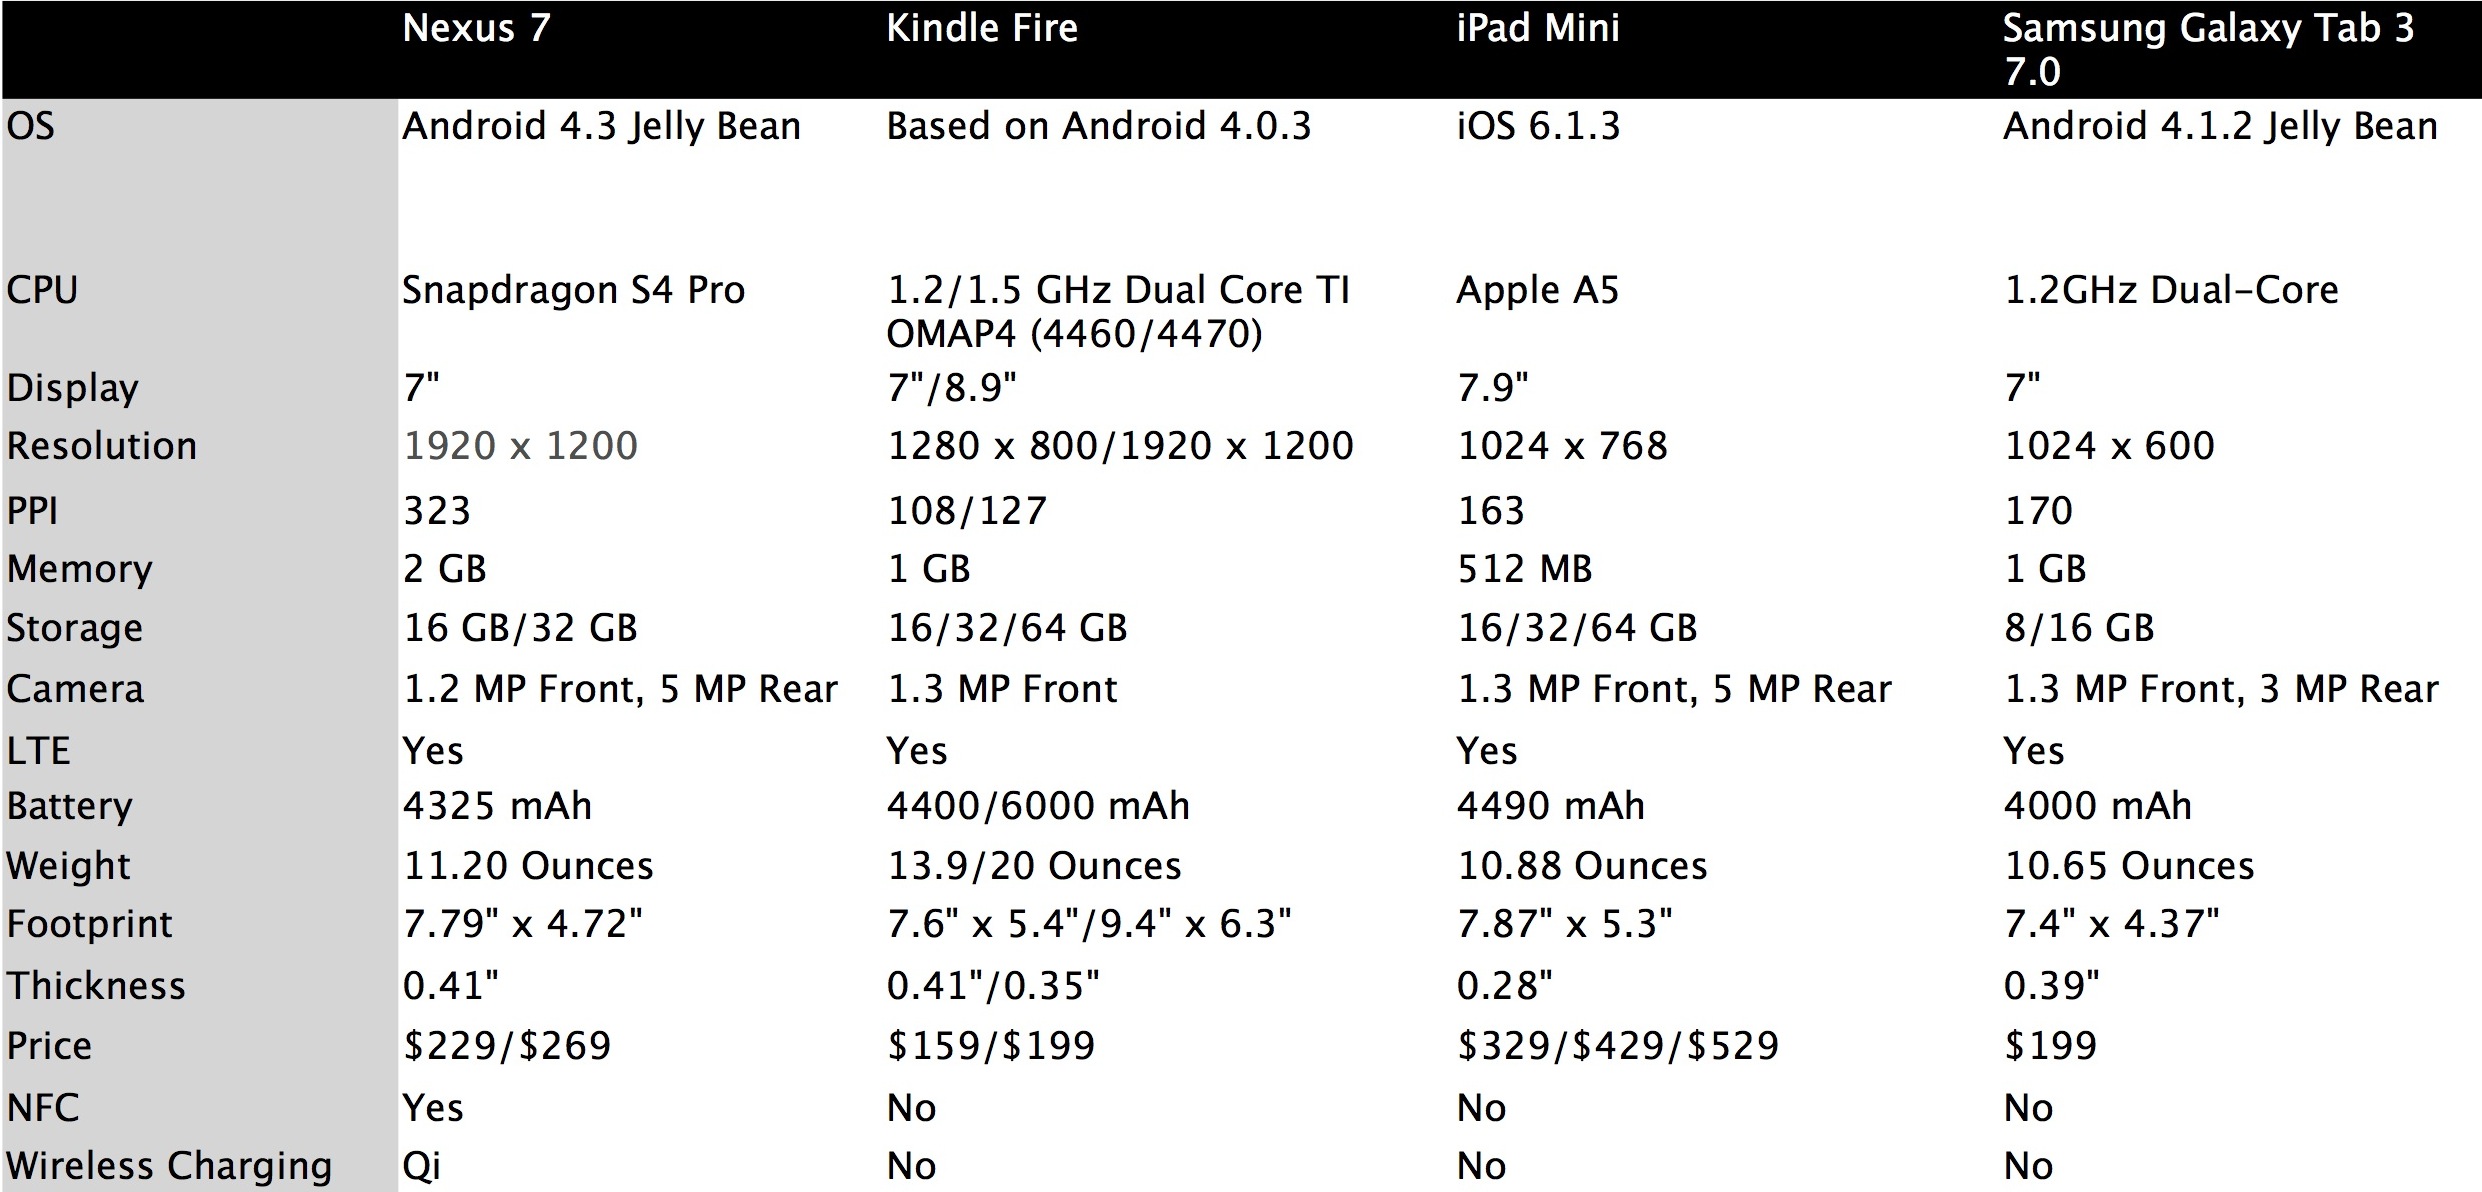 How The New Nexus 7 Stacks Up To The Competition